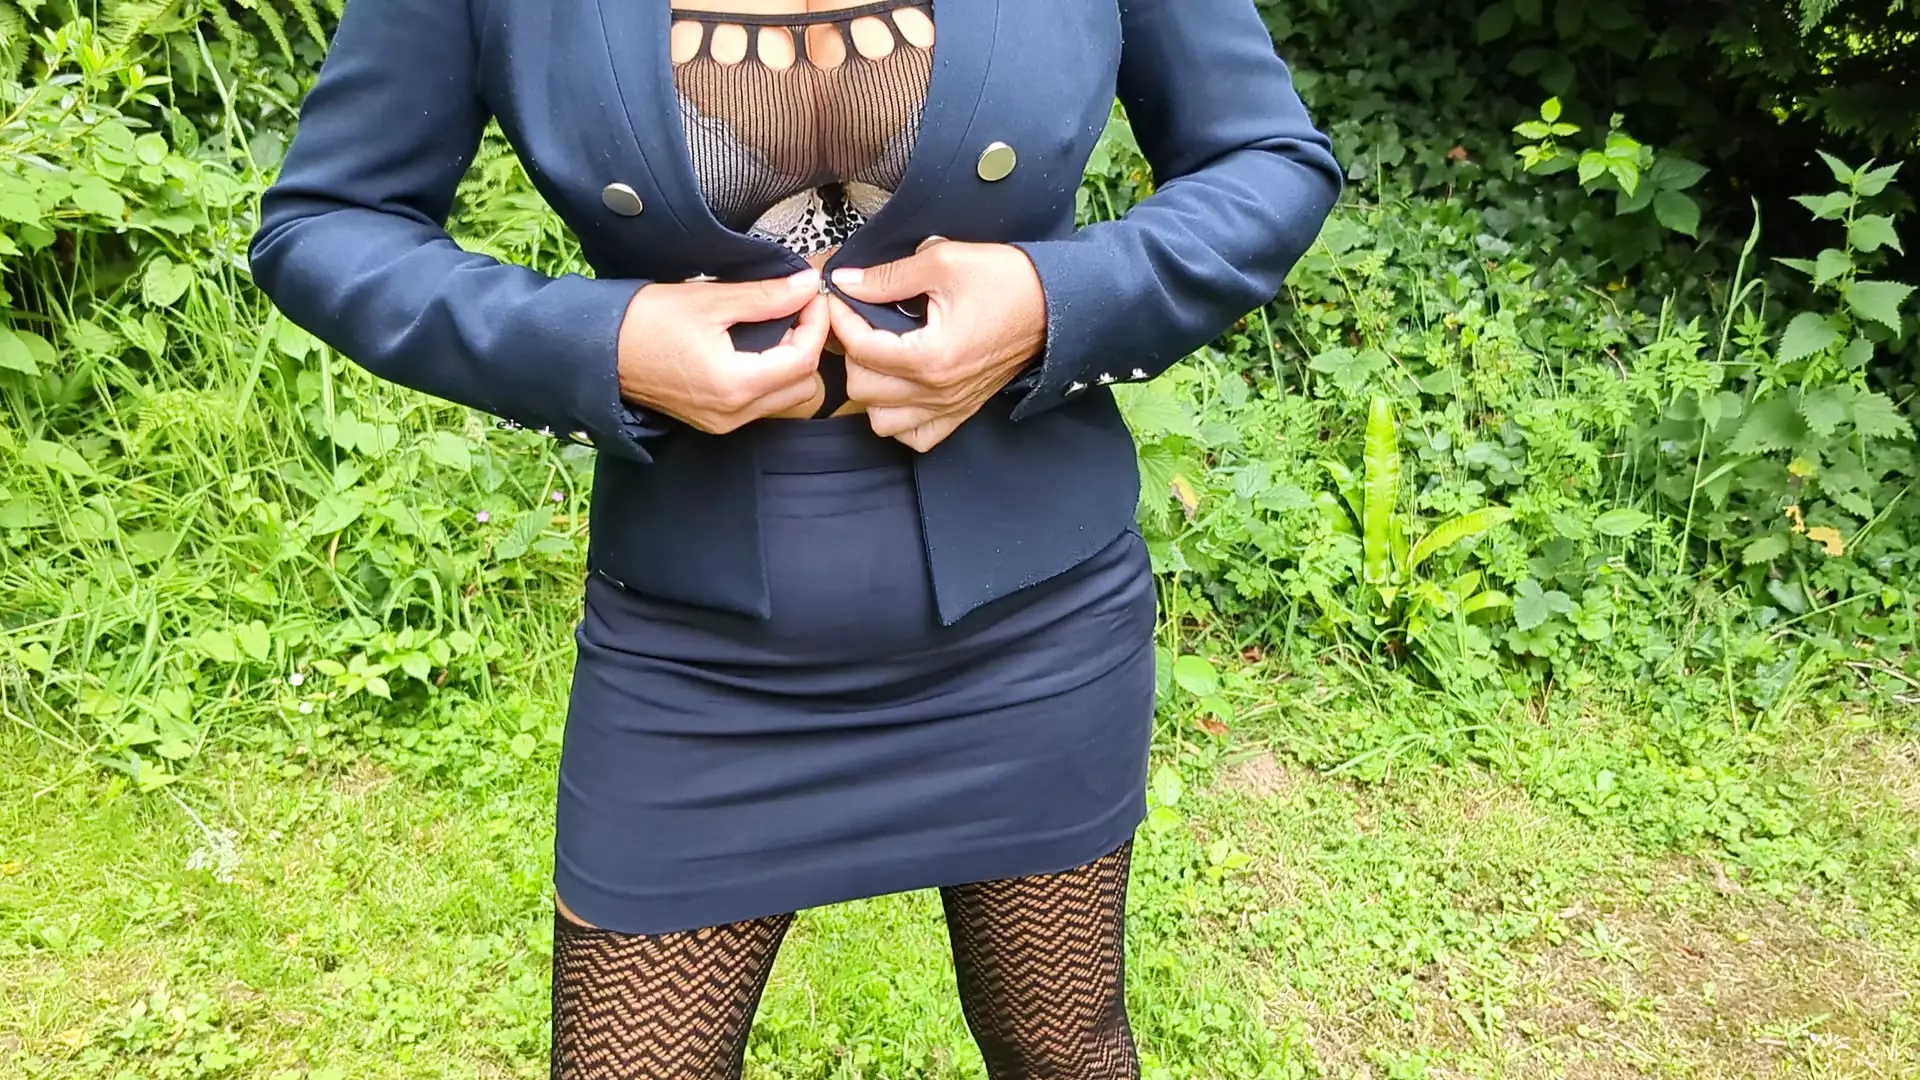 Hot french milf wife with big natural tits stripping outdoors on her lunch break